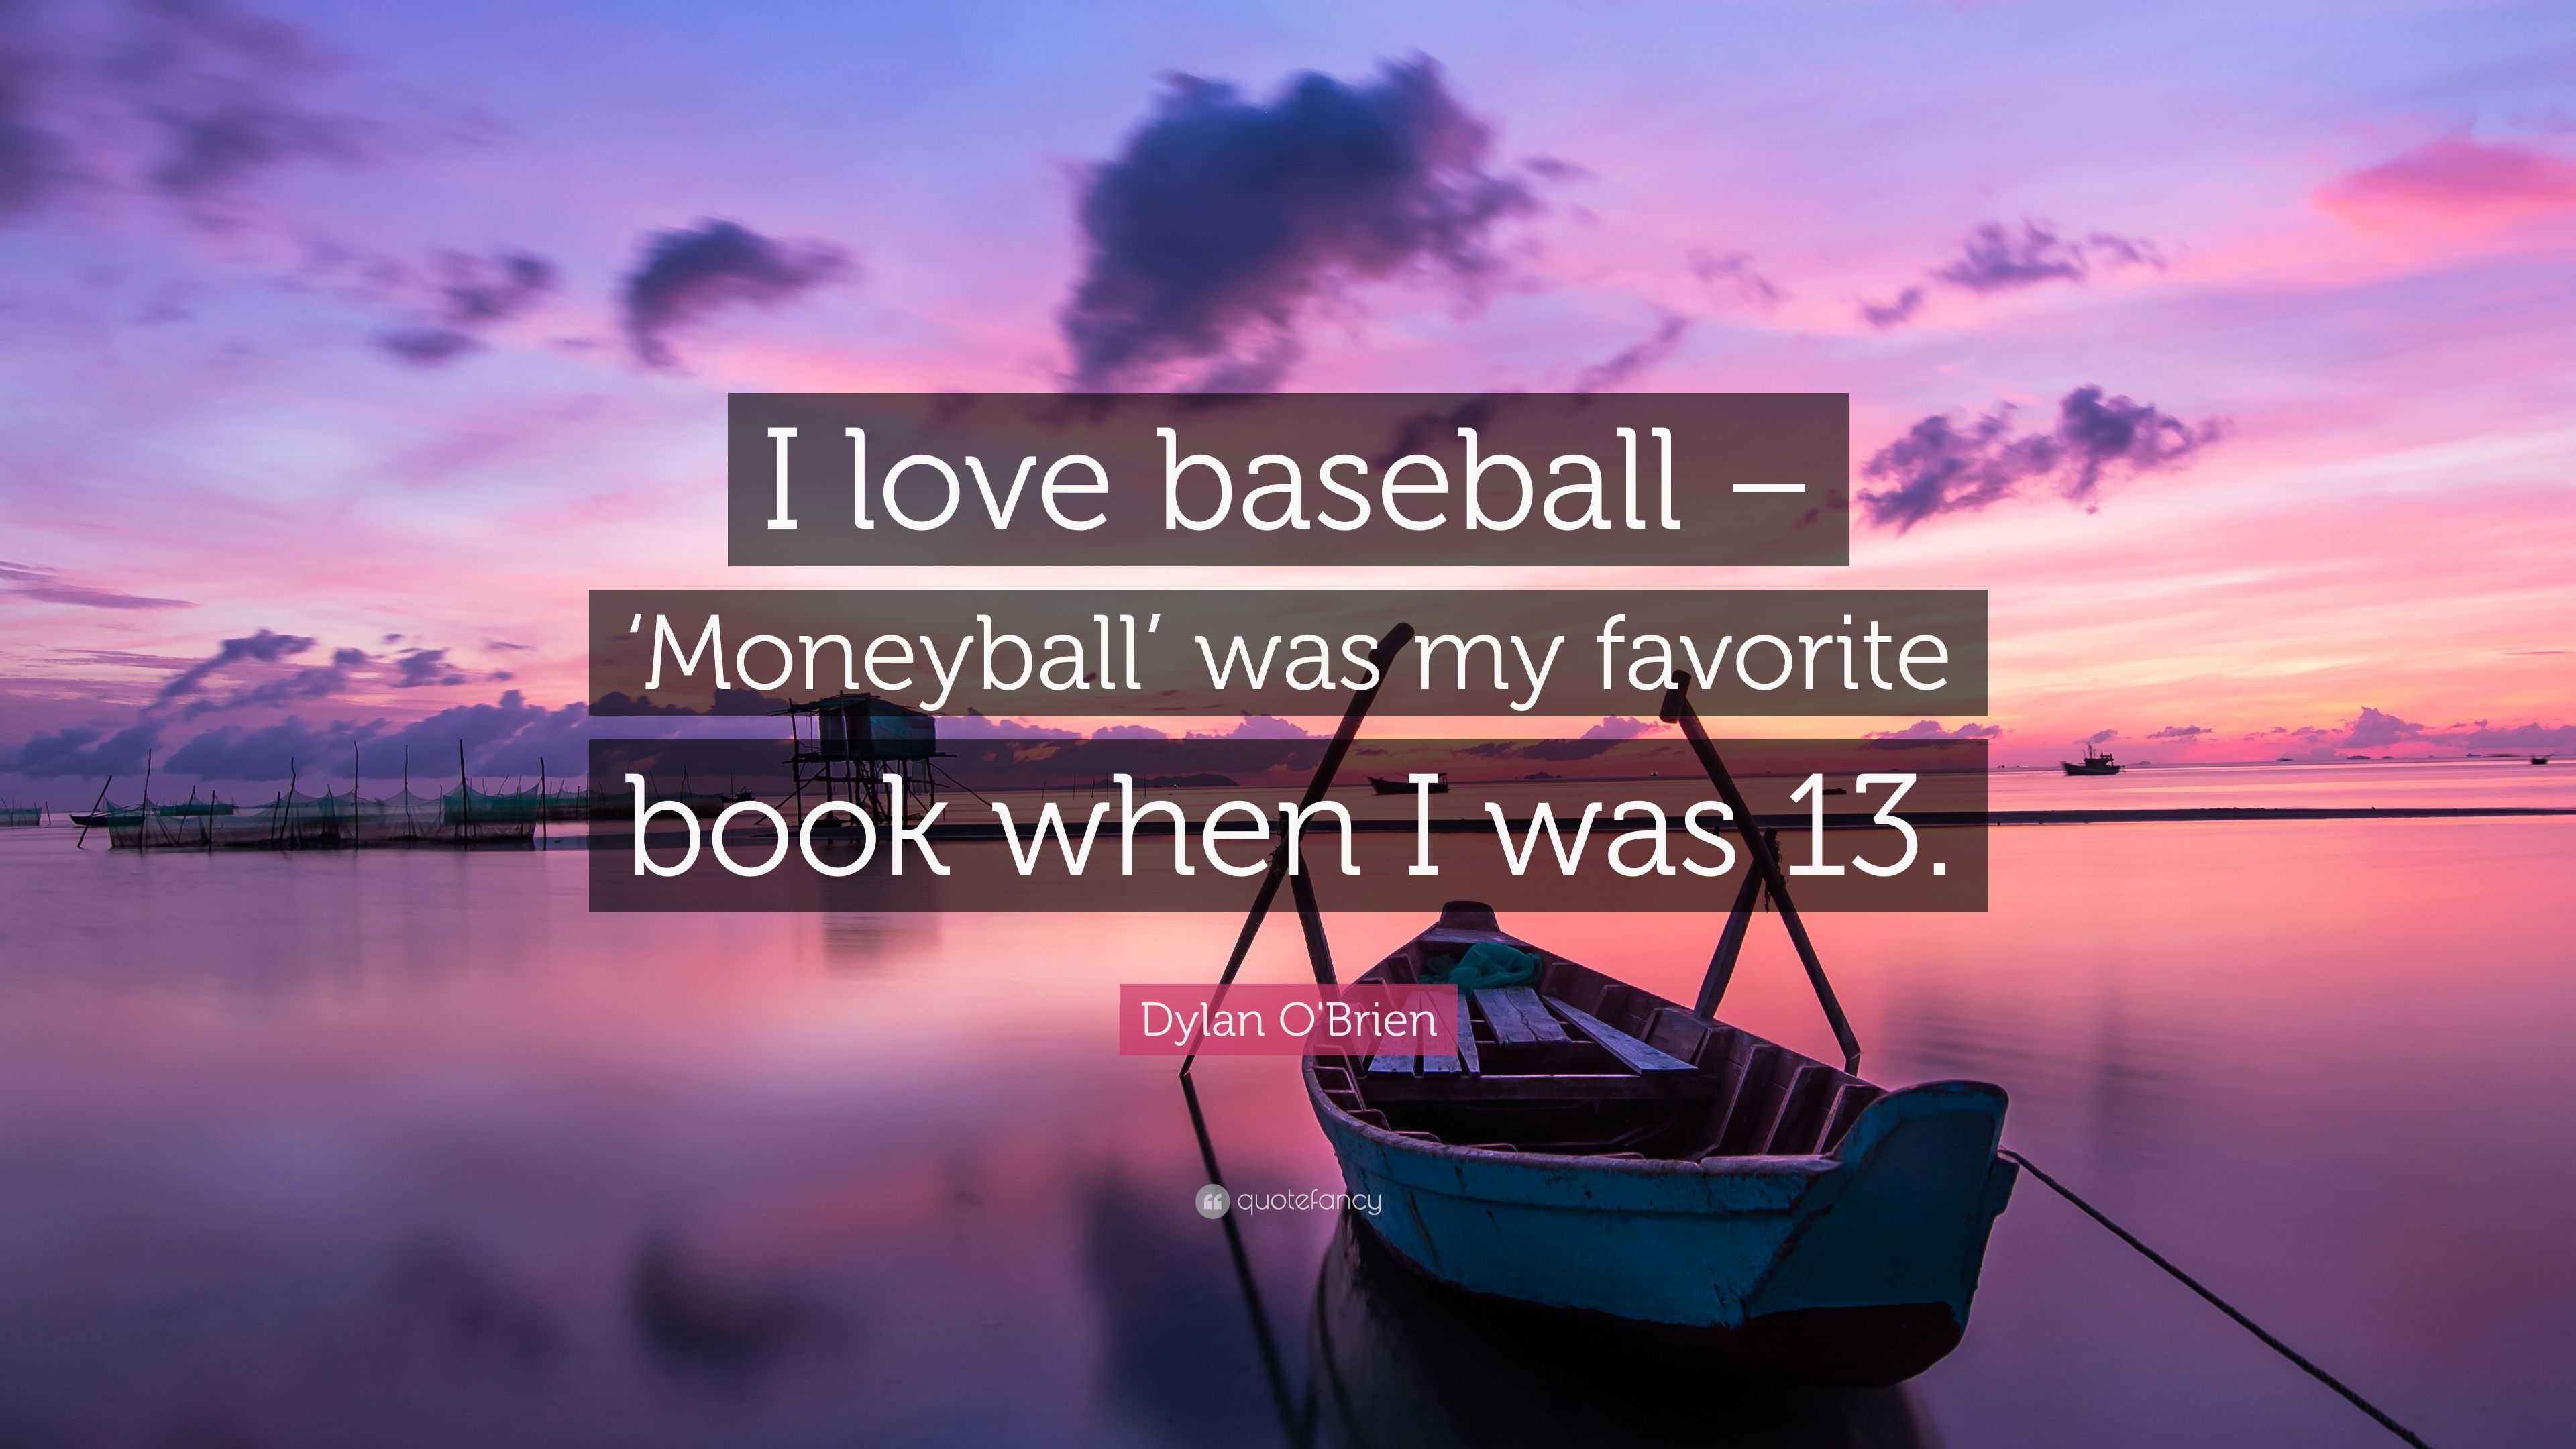 Dylan O'Brien Quote: "I love baseball - 'Moneyball' was my favorite book when I was 13." (7 ...